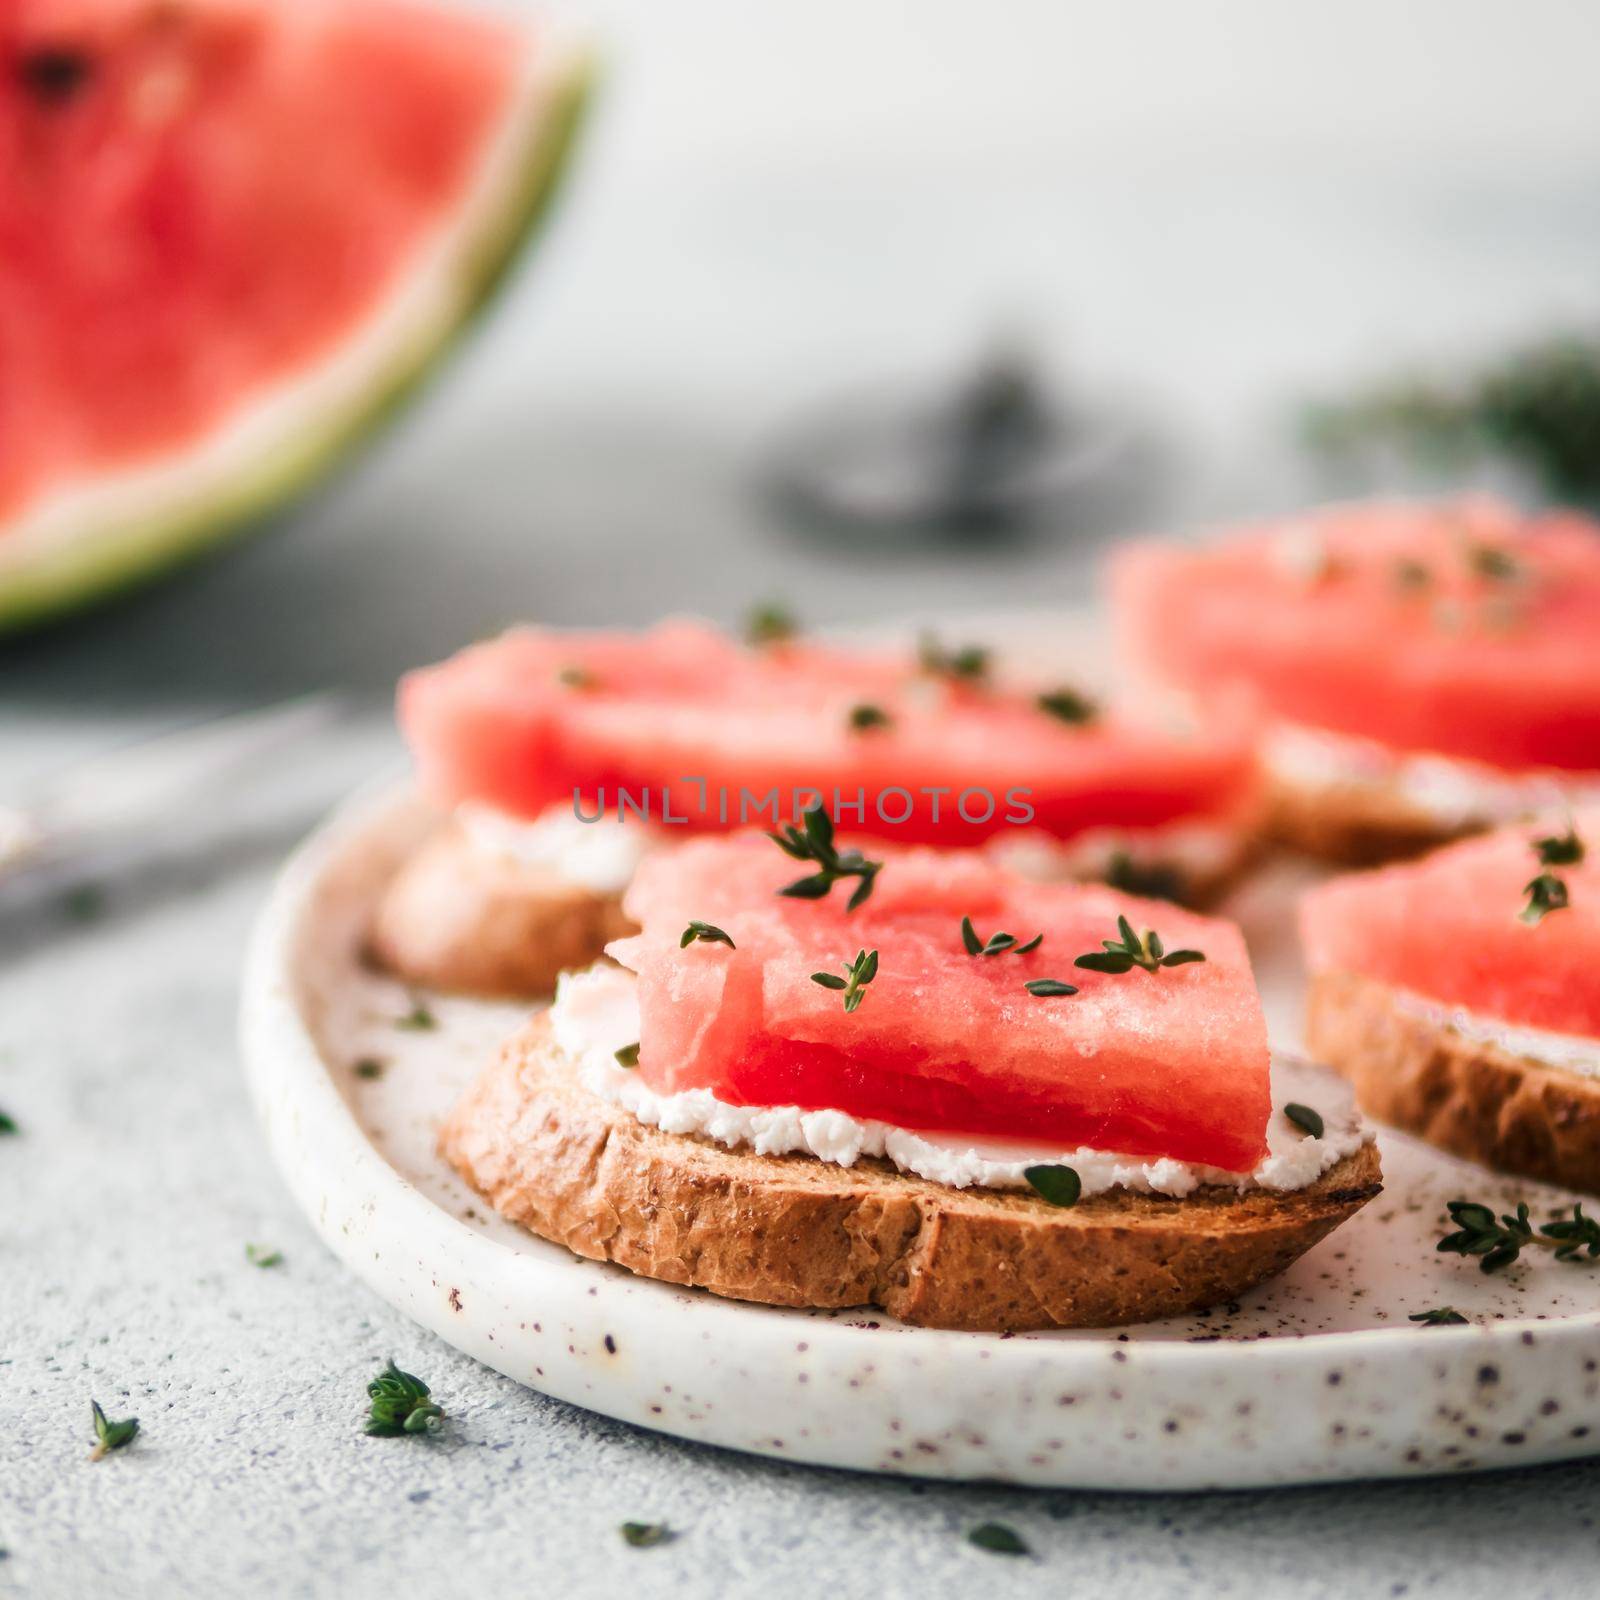 Toasts with soft cheese, watermelon and fresh thyme.Salty cheese,sweet watermelon and spicy thyme on crispy grilled bread slices. Idea and recipe for unusual healthy breakfast, summer snack or lunch